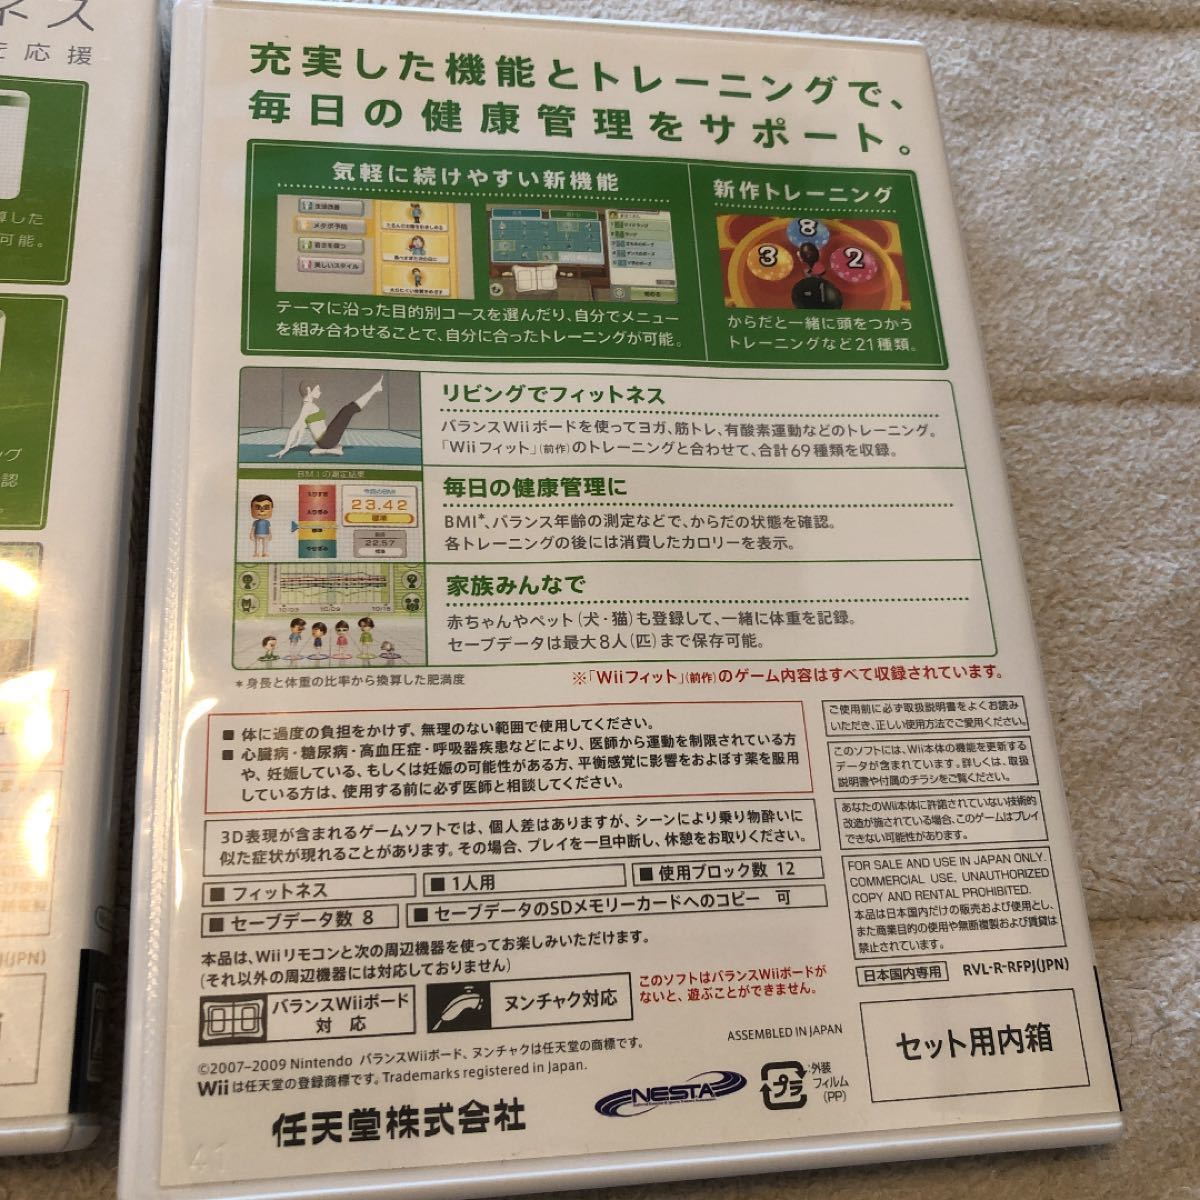 Wii fit plus とWii fitのソフト